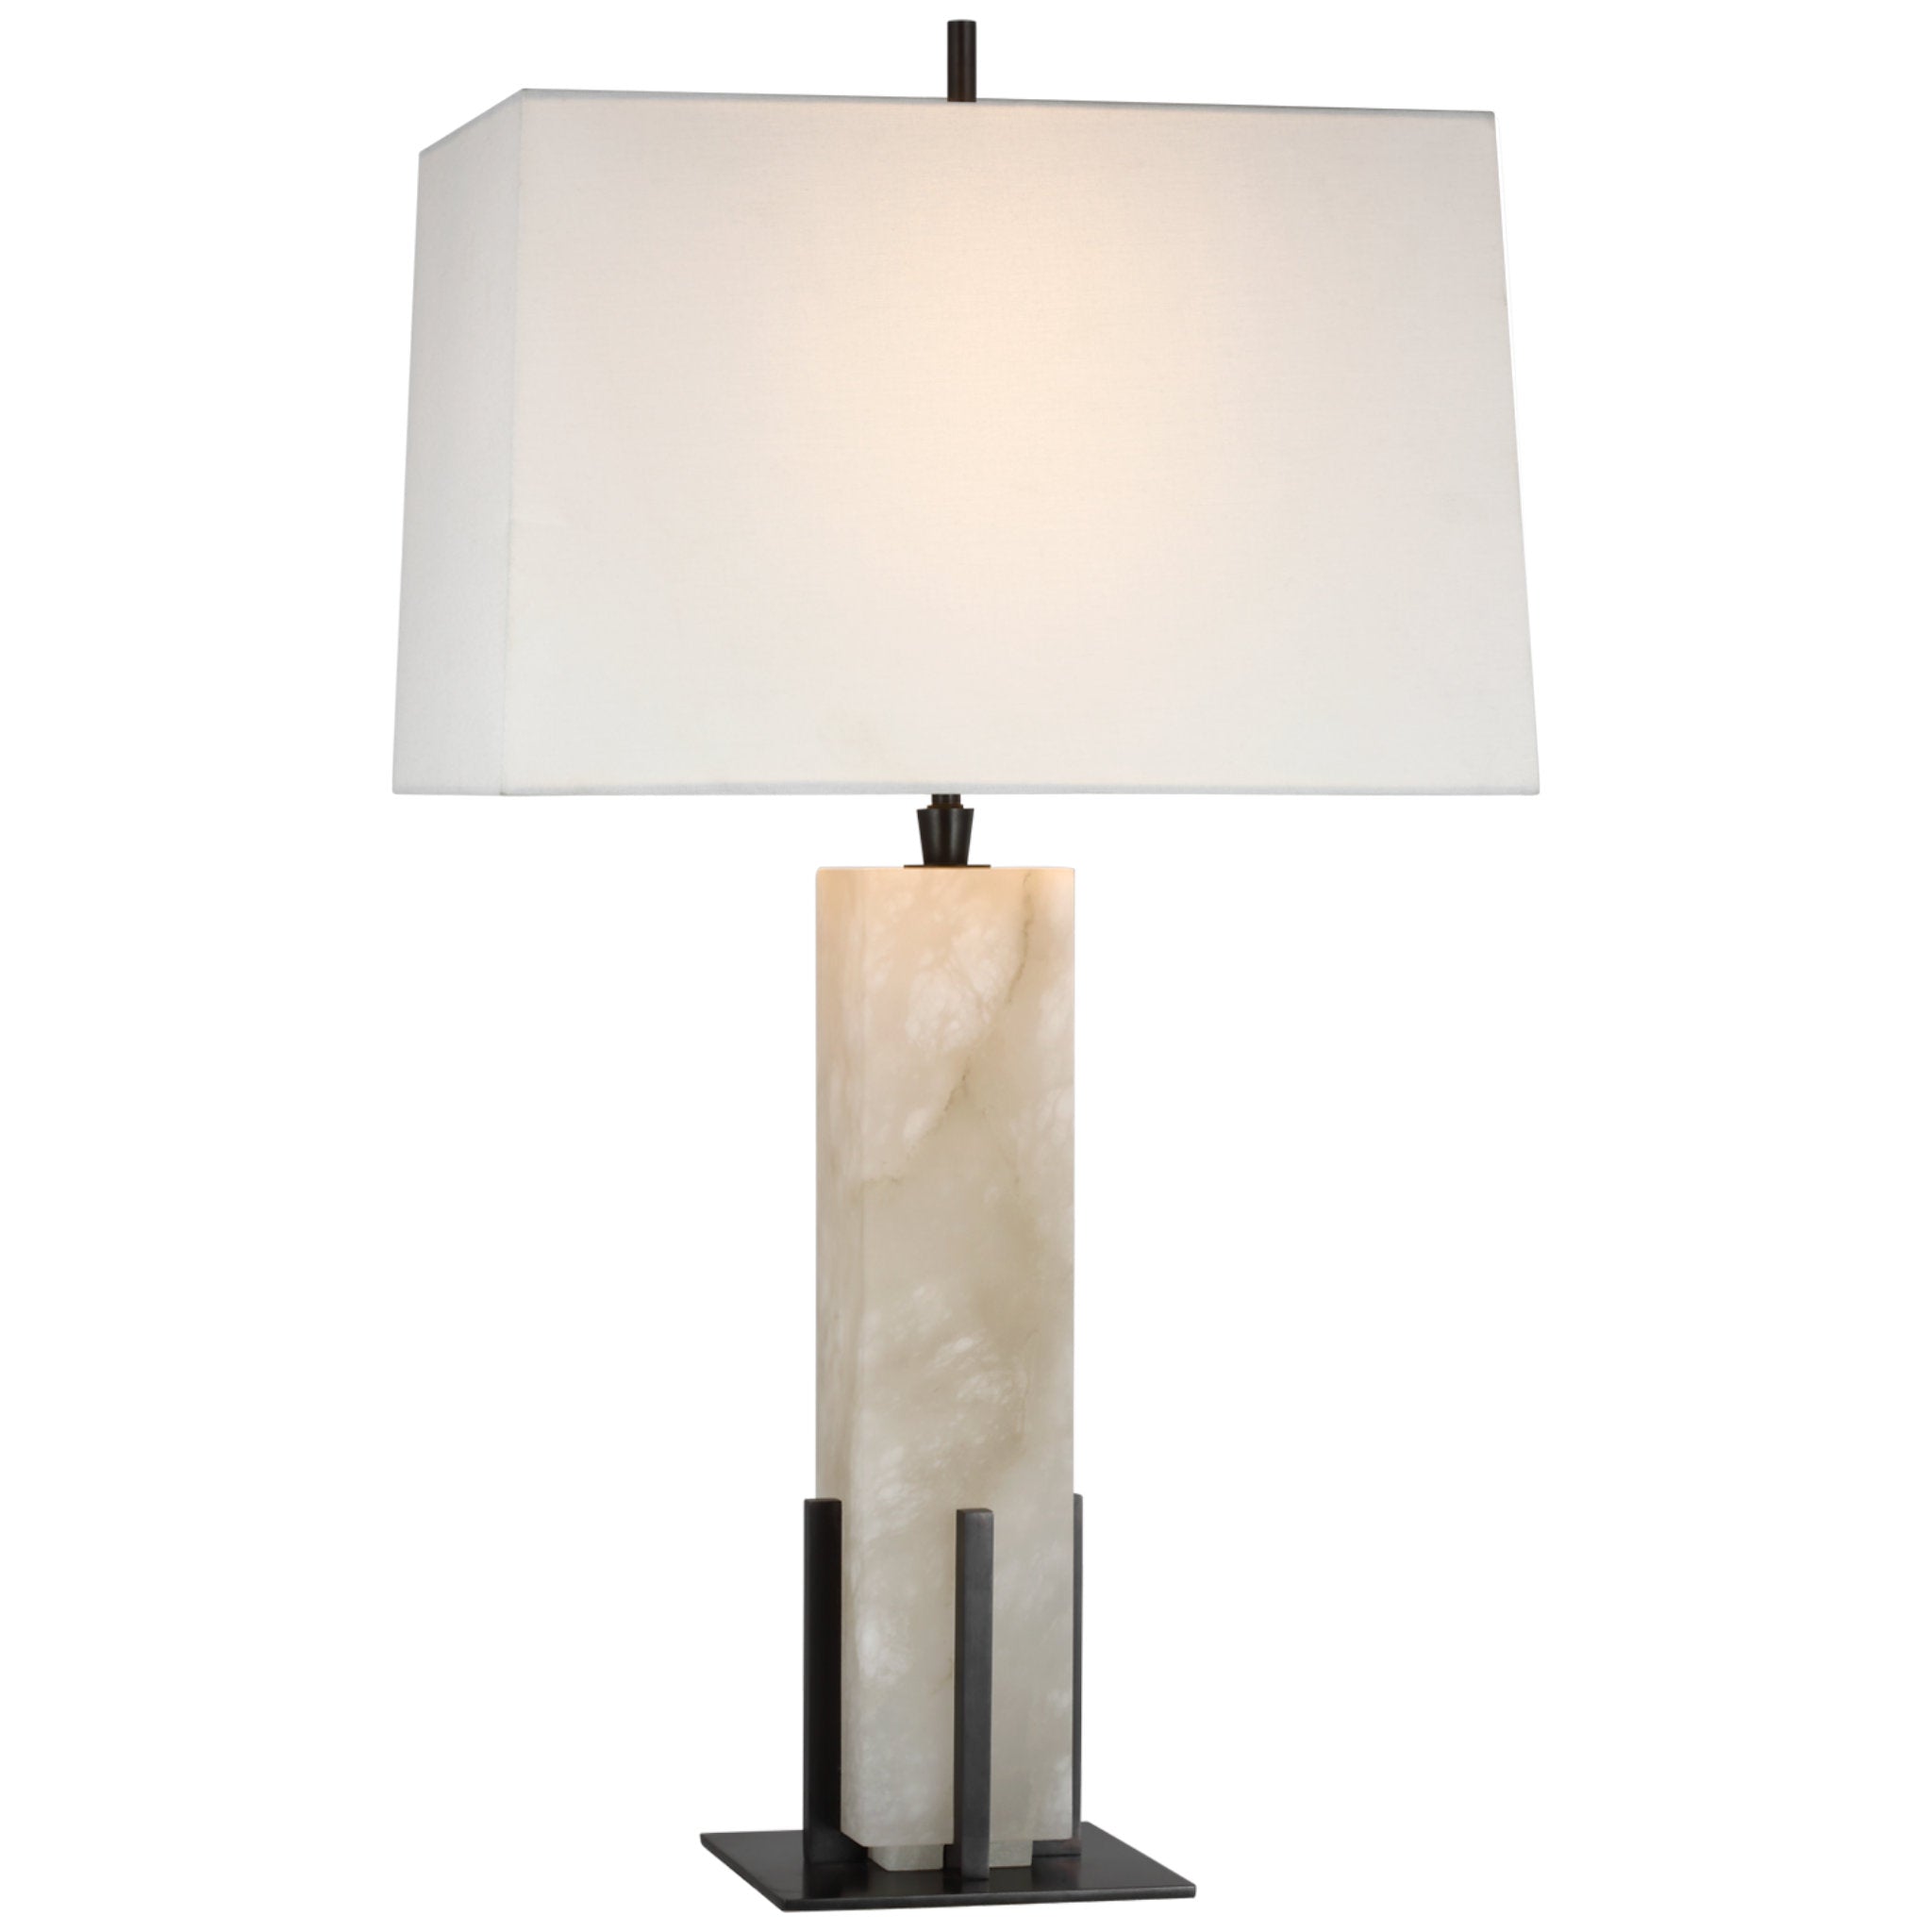 Thomas O'Brien Gironde Large Table Lamp in Alabaster and Bronze with Linen Shade